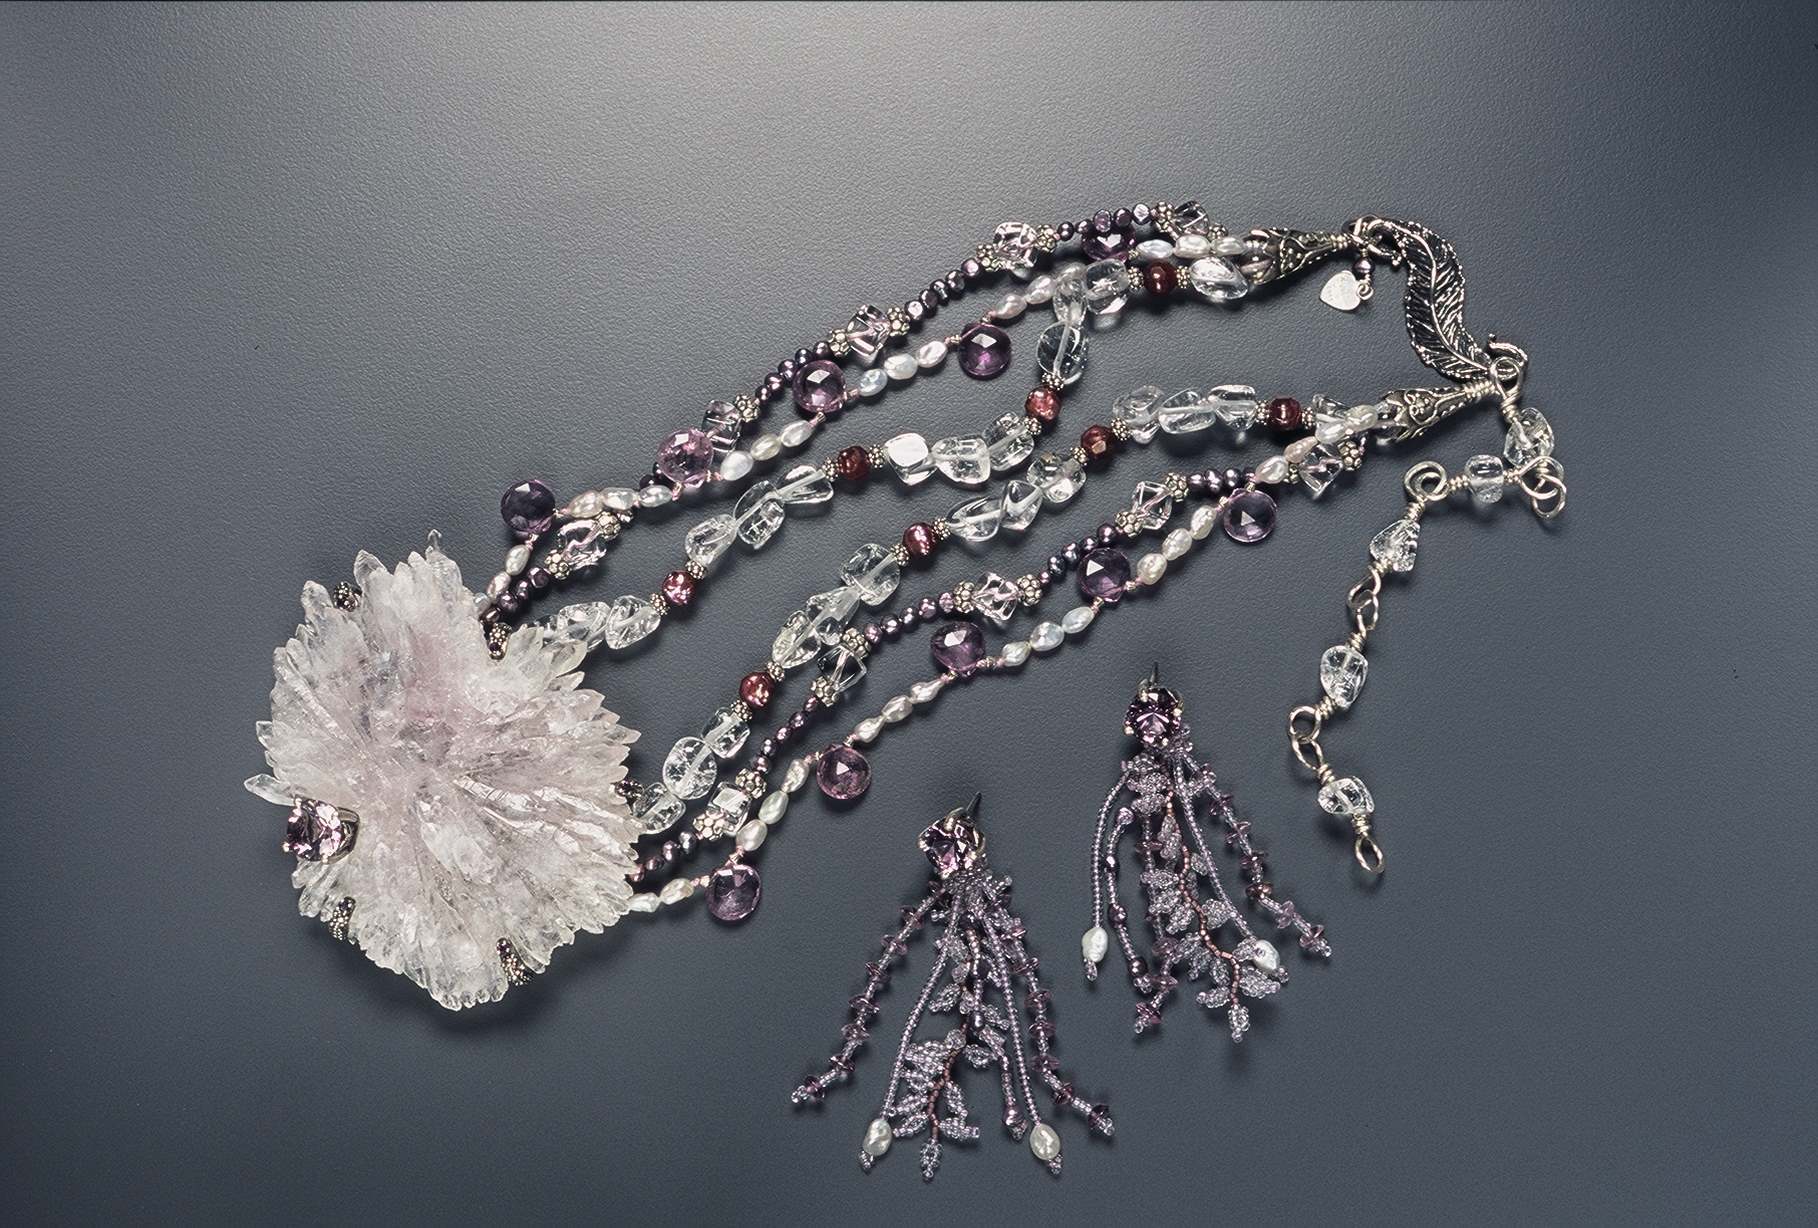 Detail of Amethyst Ice Necklace and earrings